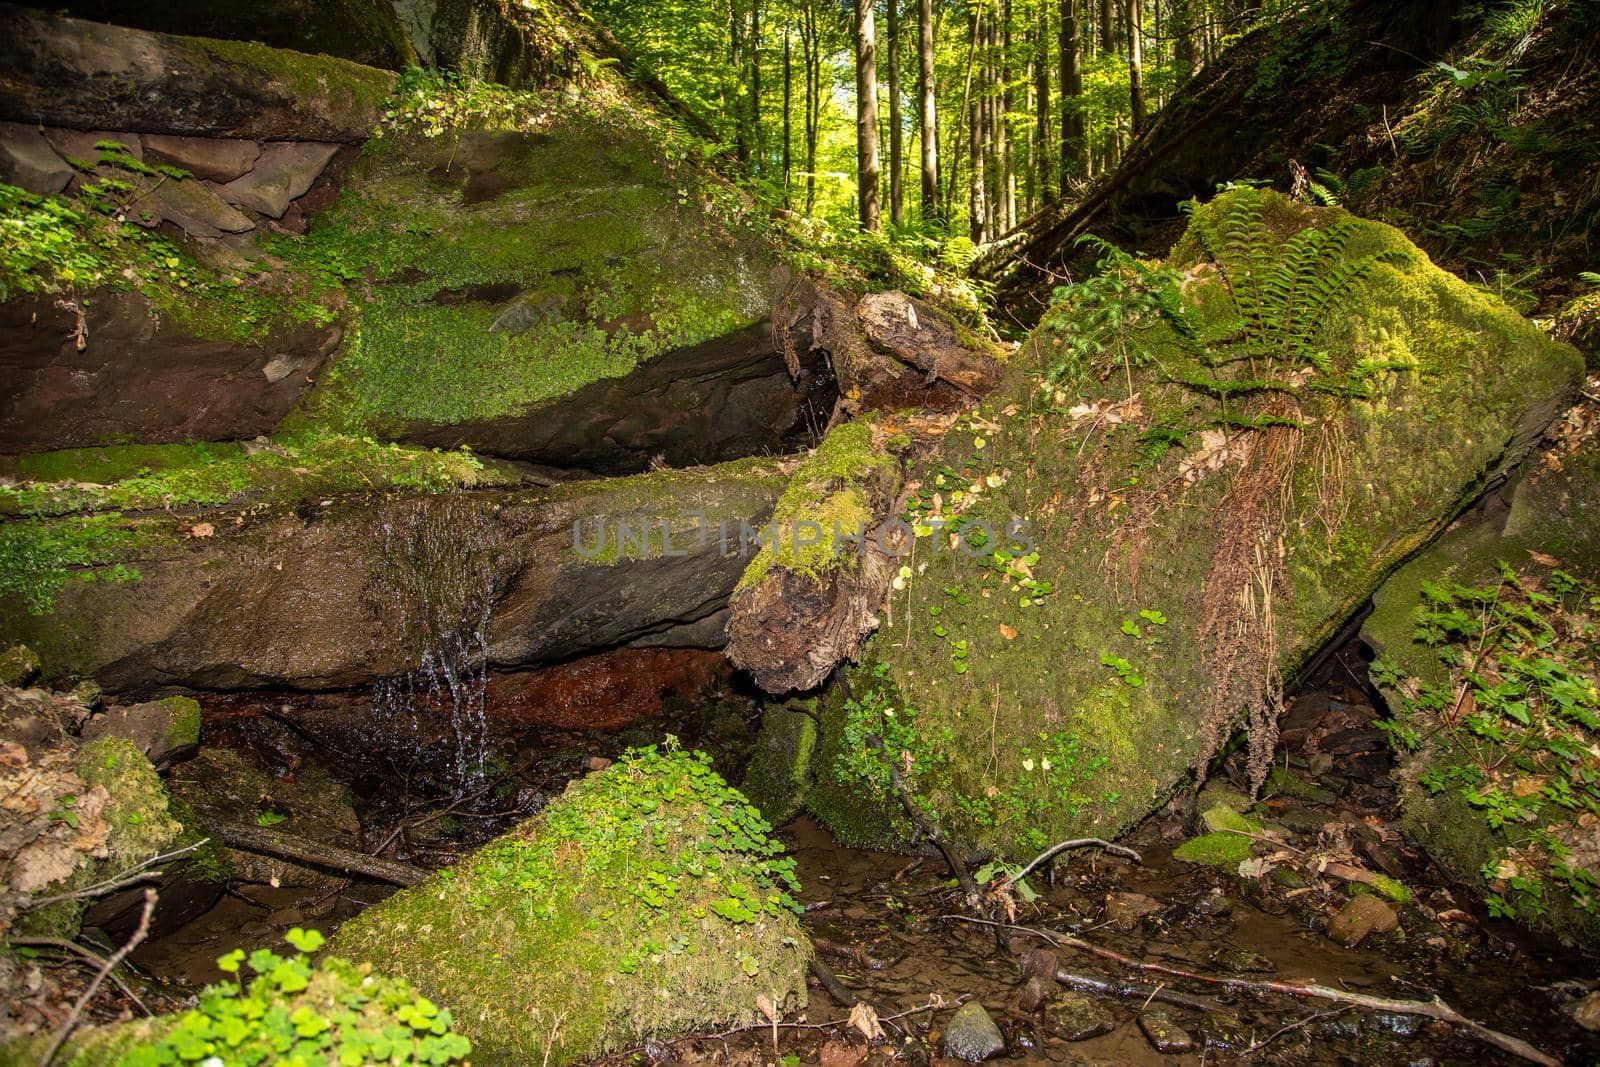 Water flowing over moss covered rocks  by reinerc